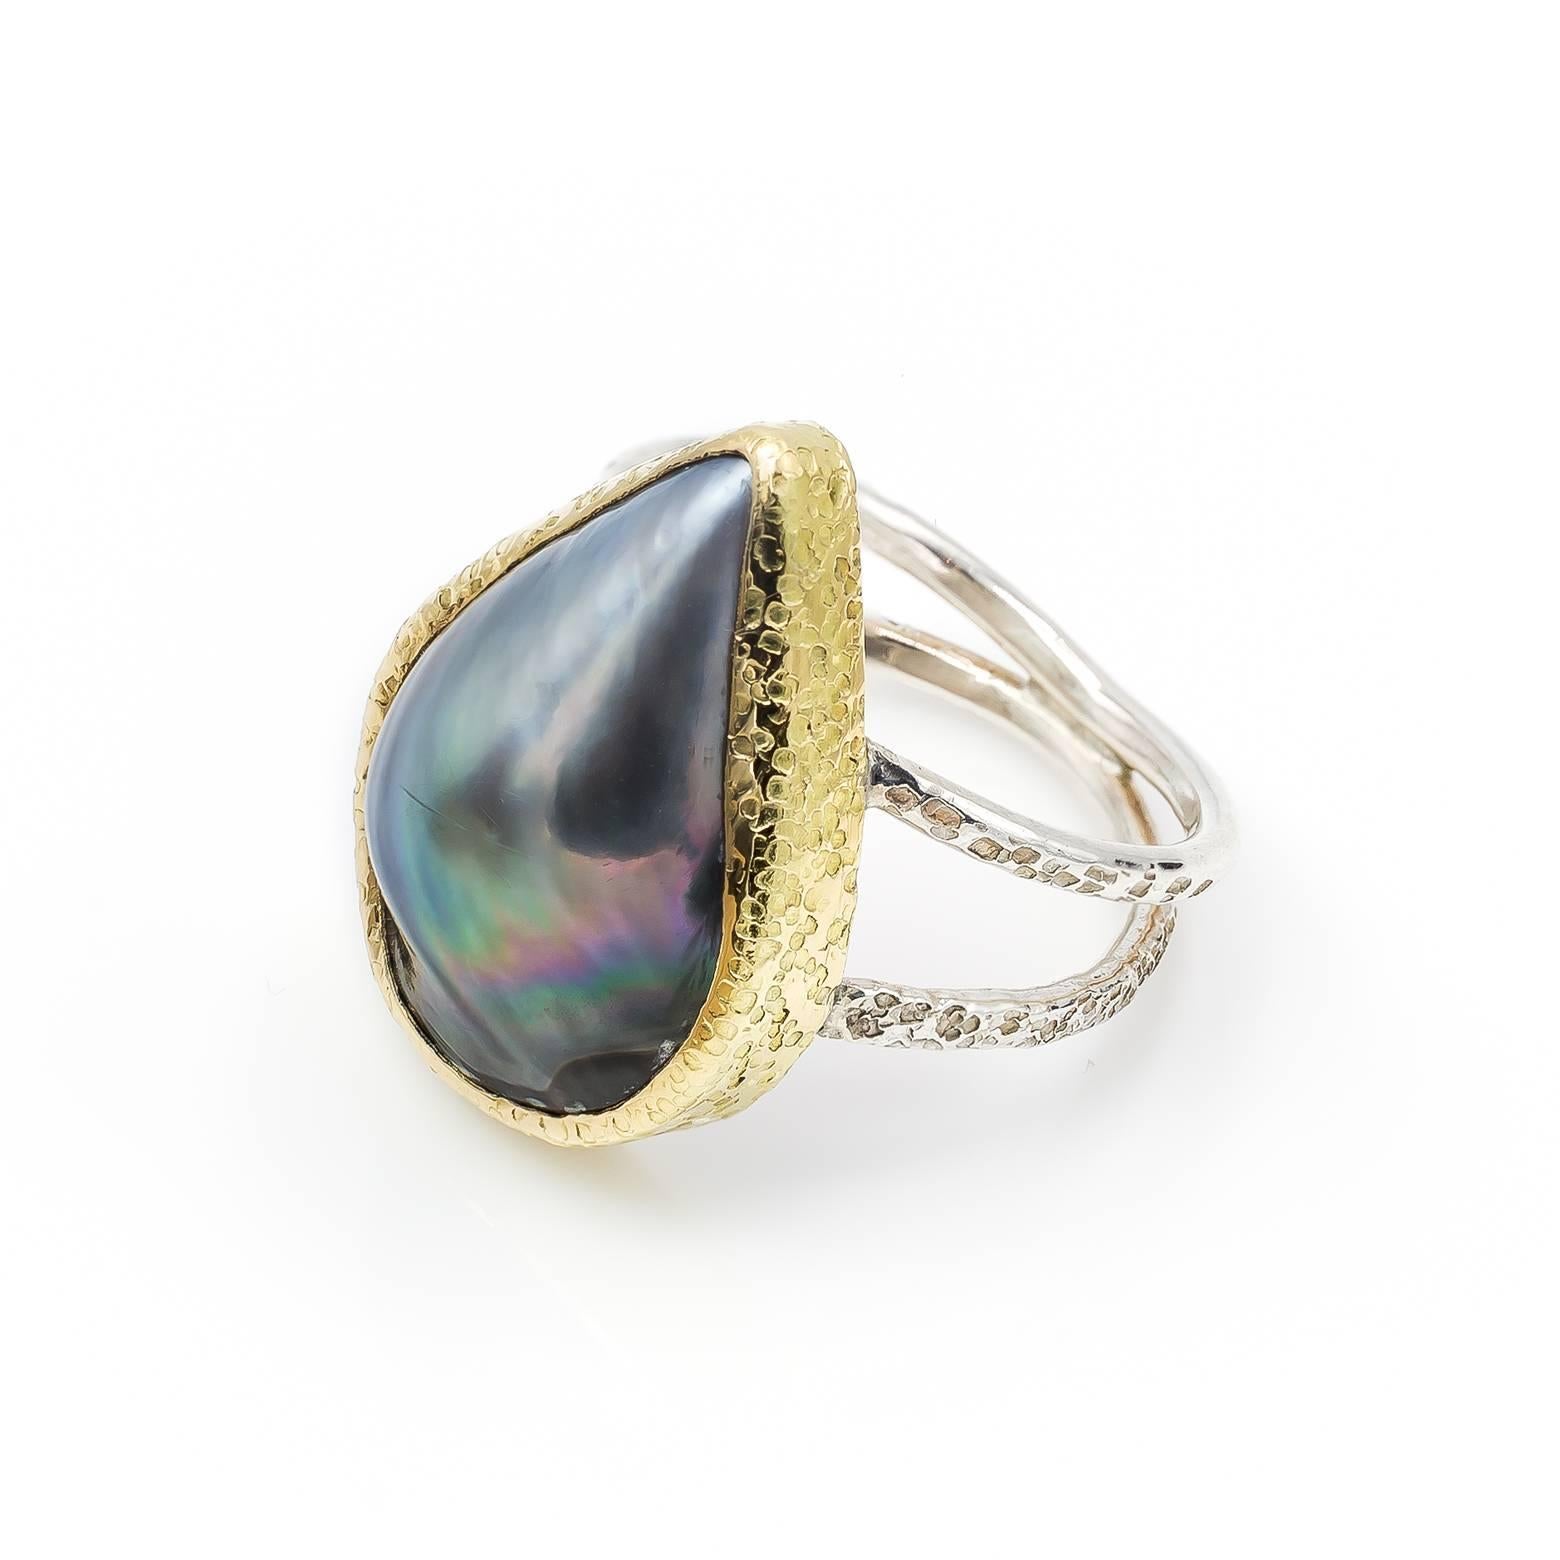 Black Mabe Peal Ring Tear Shaped in Gold and Sterling Silver 1